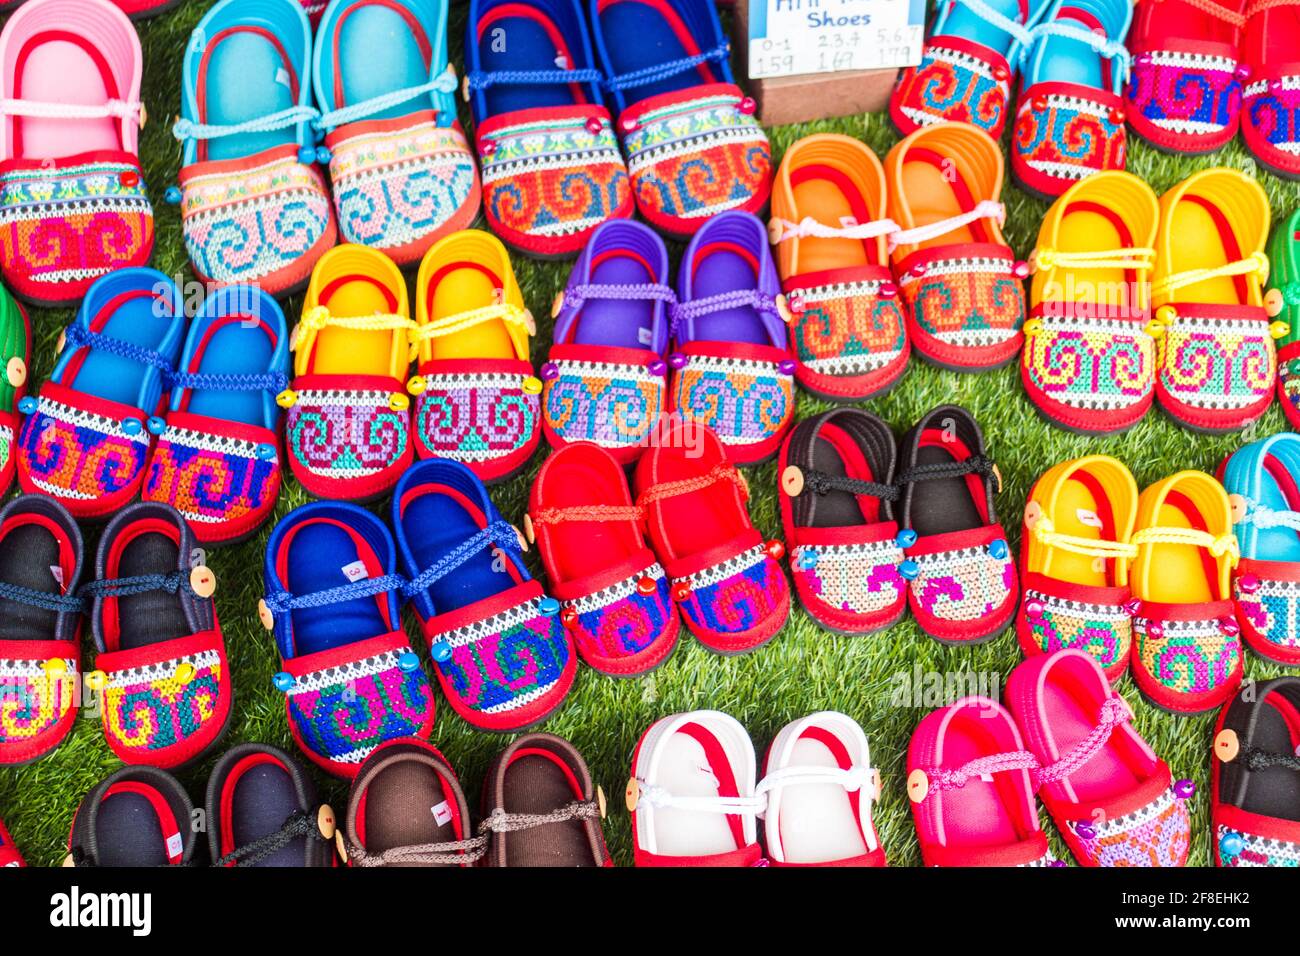 Thai Hilltribe shoes for sale on market stall Stock Photo